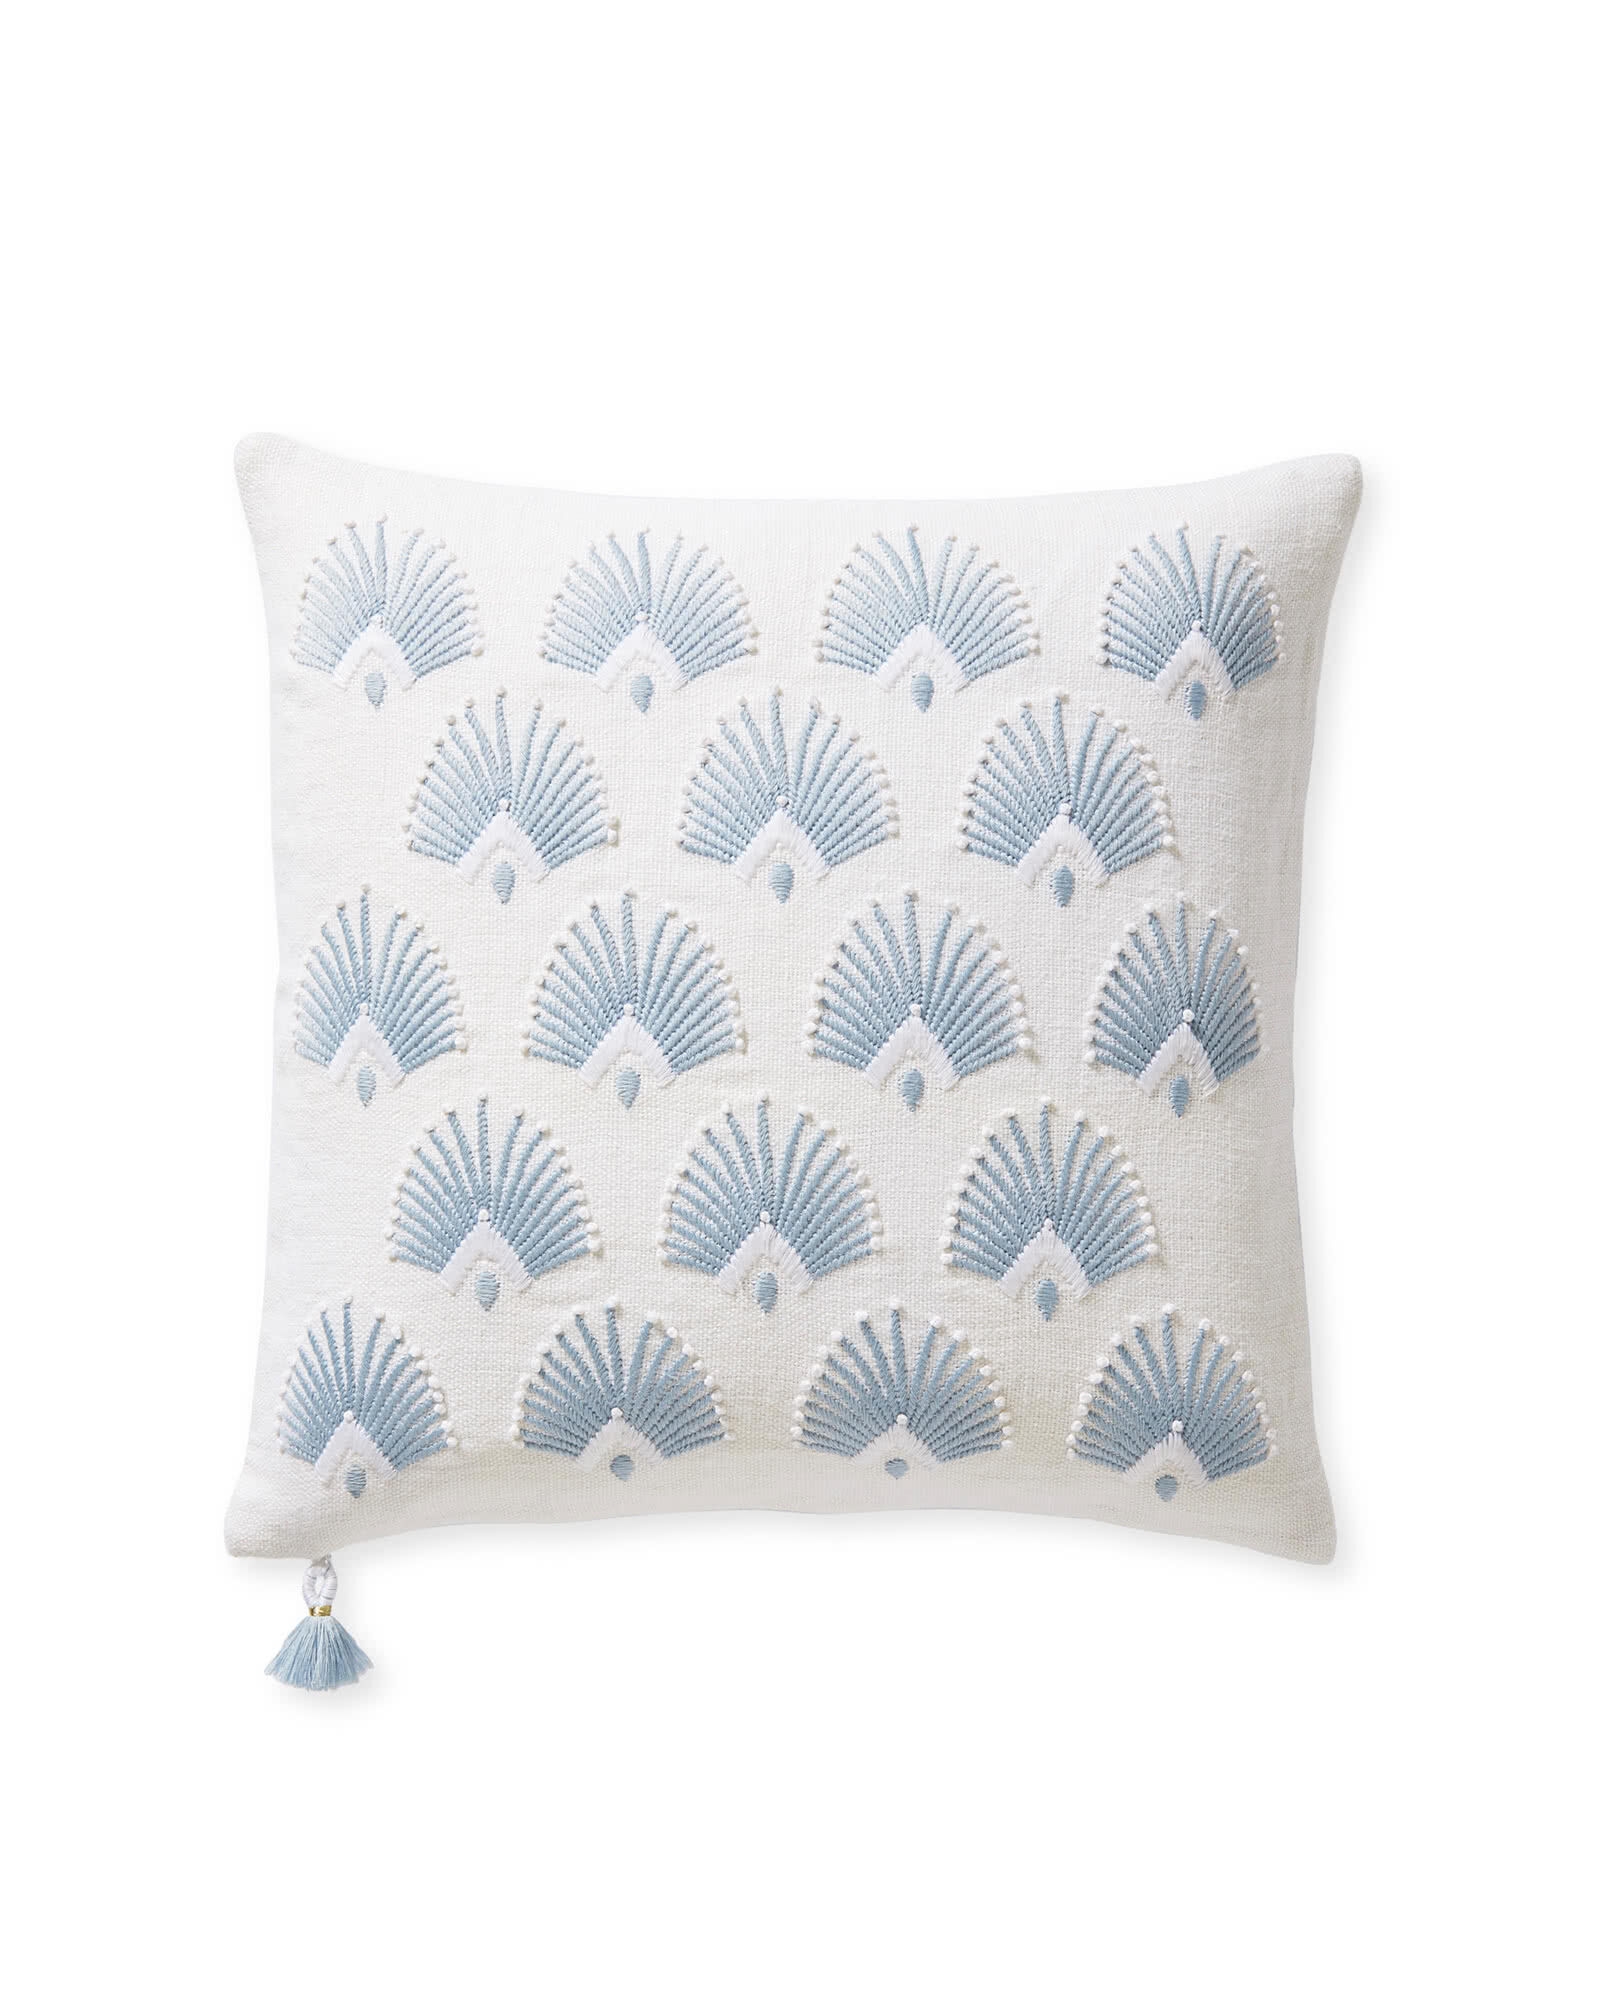 Monarch Pillow Cover - Image 0